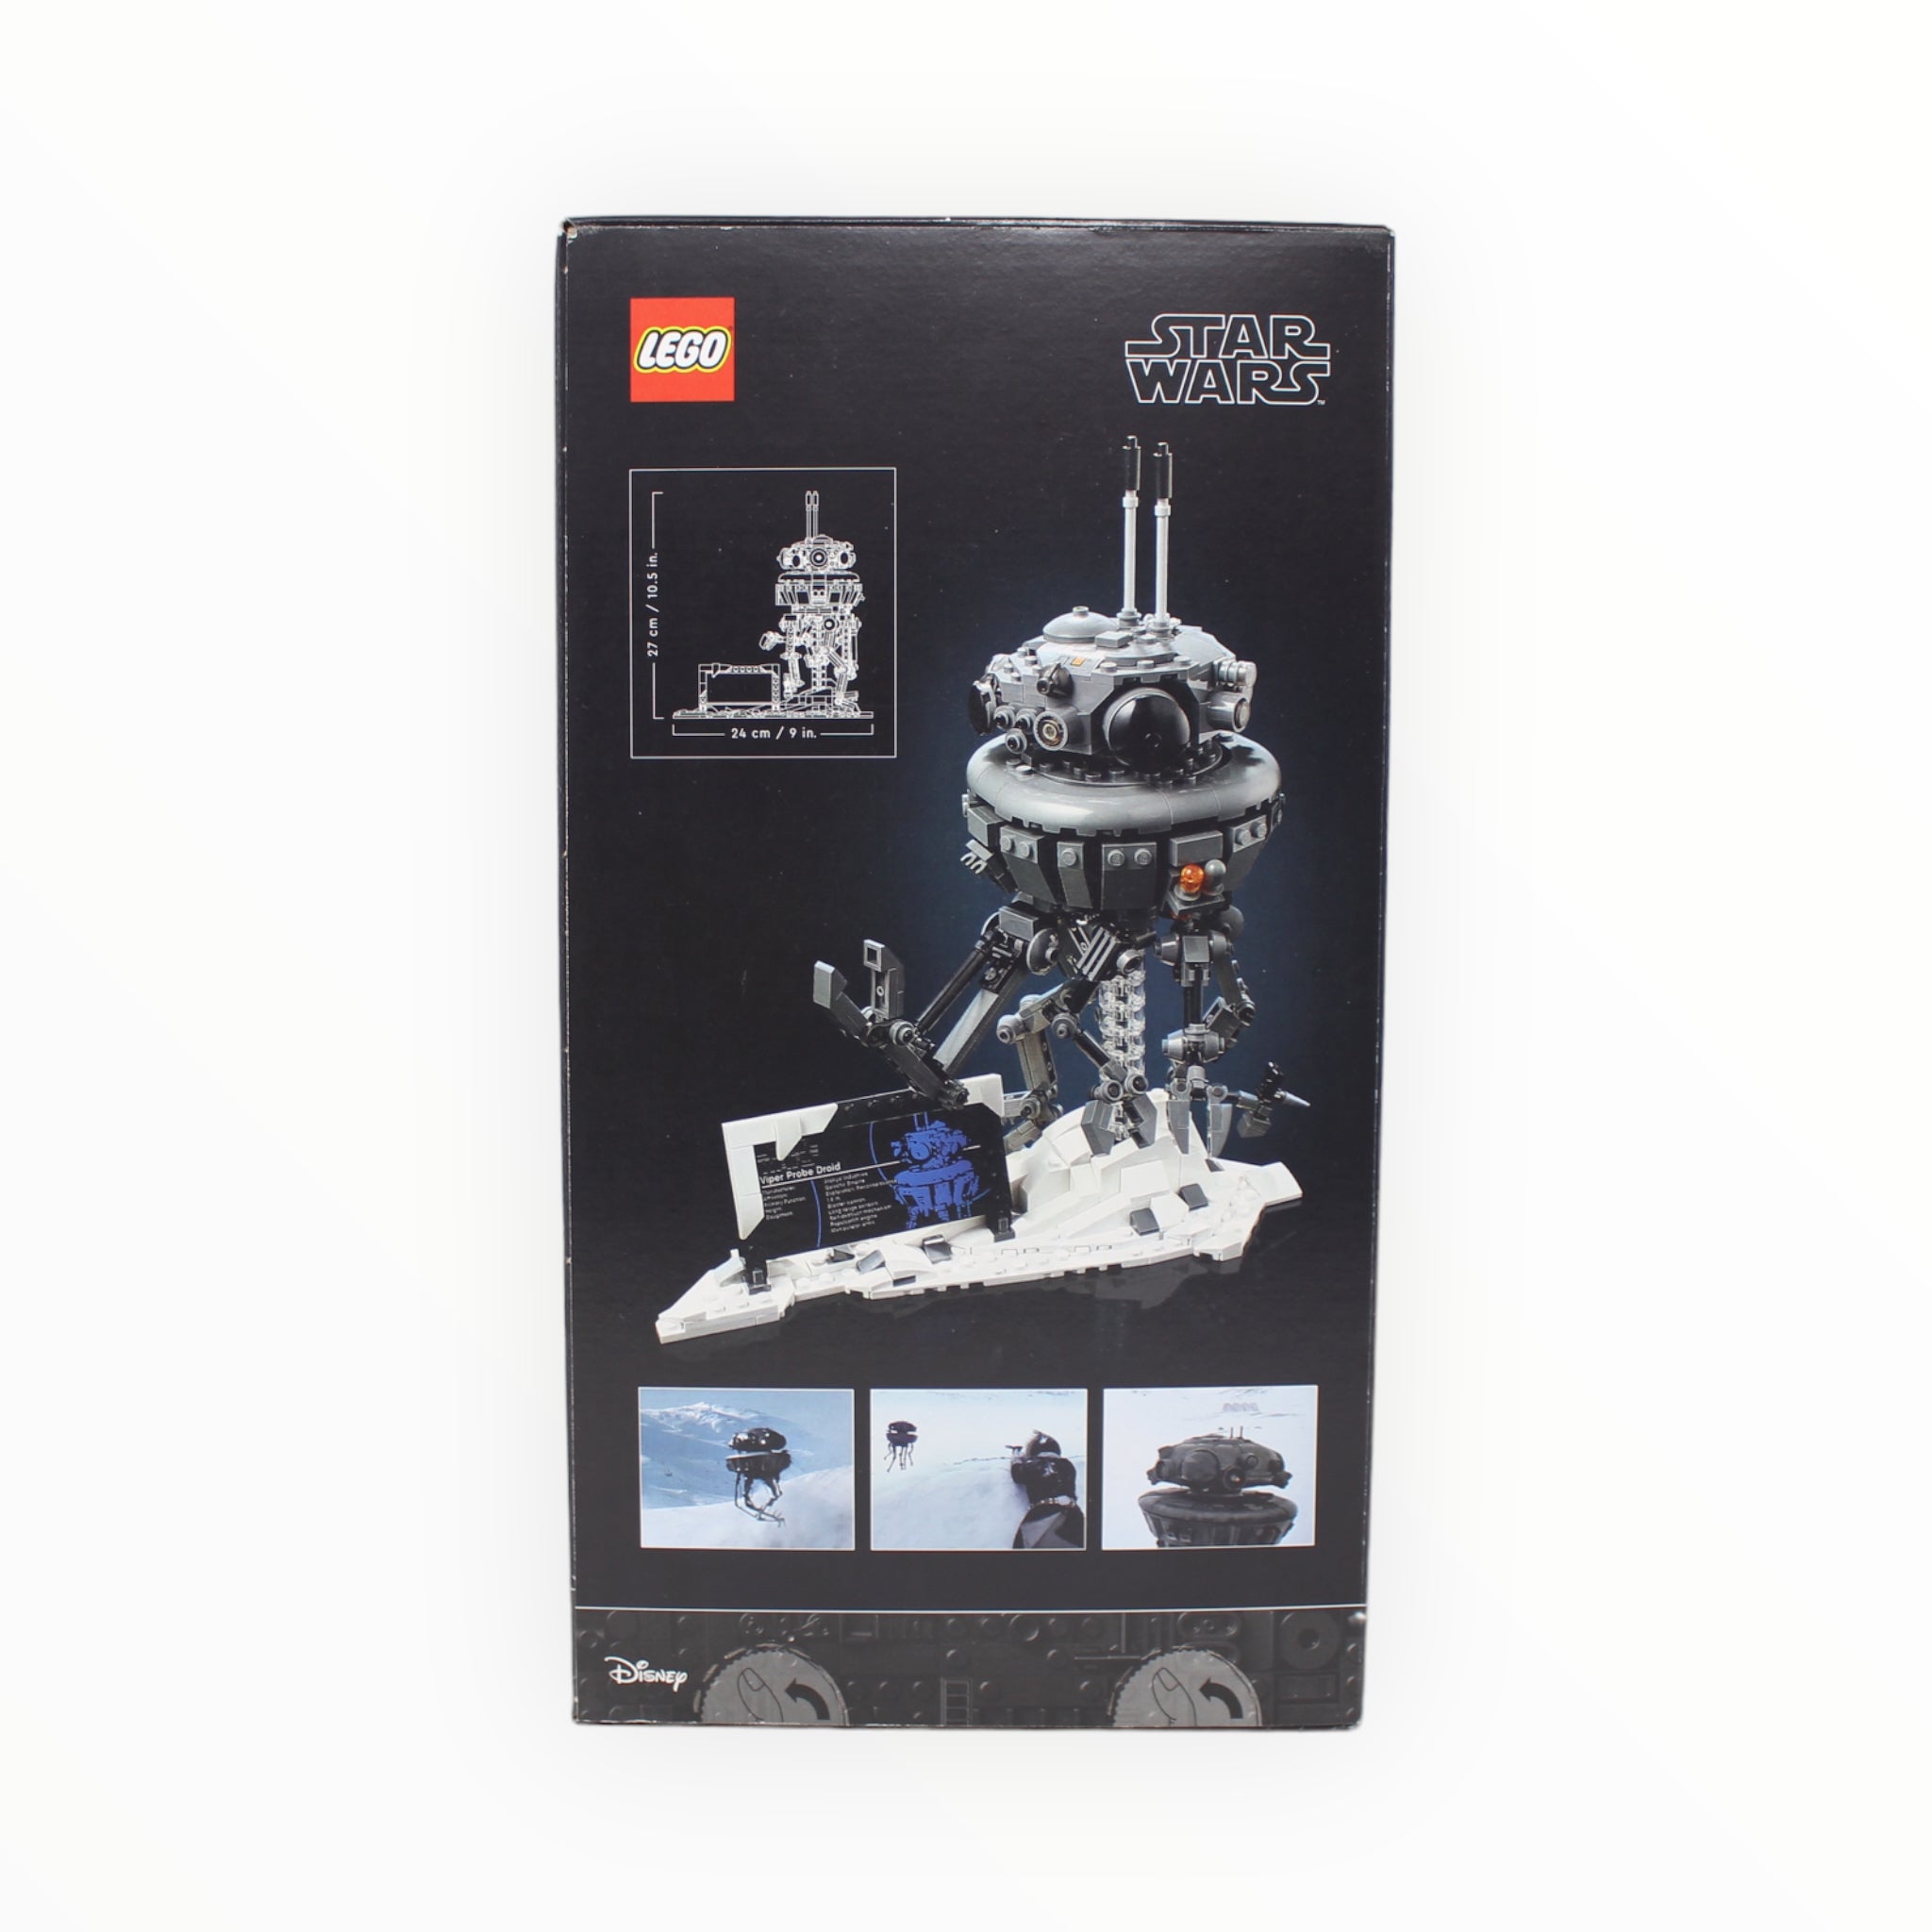 Retired Set 75306 Star Wars Imperial Probe Droid